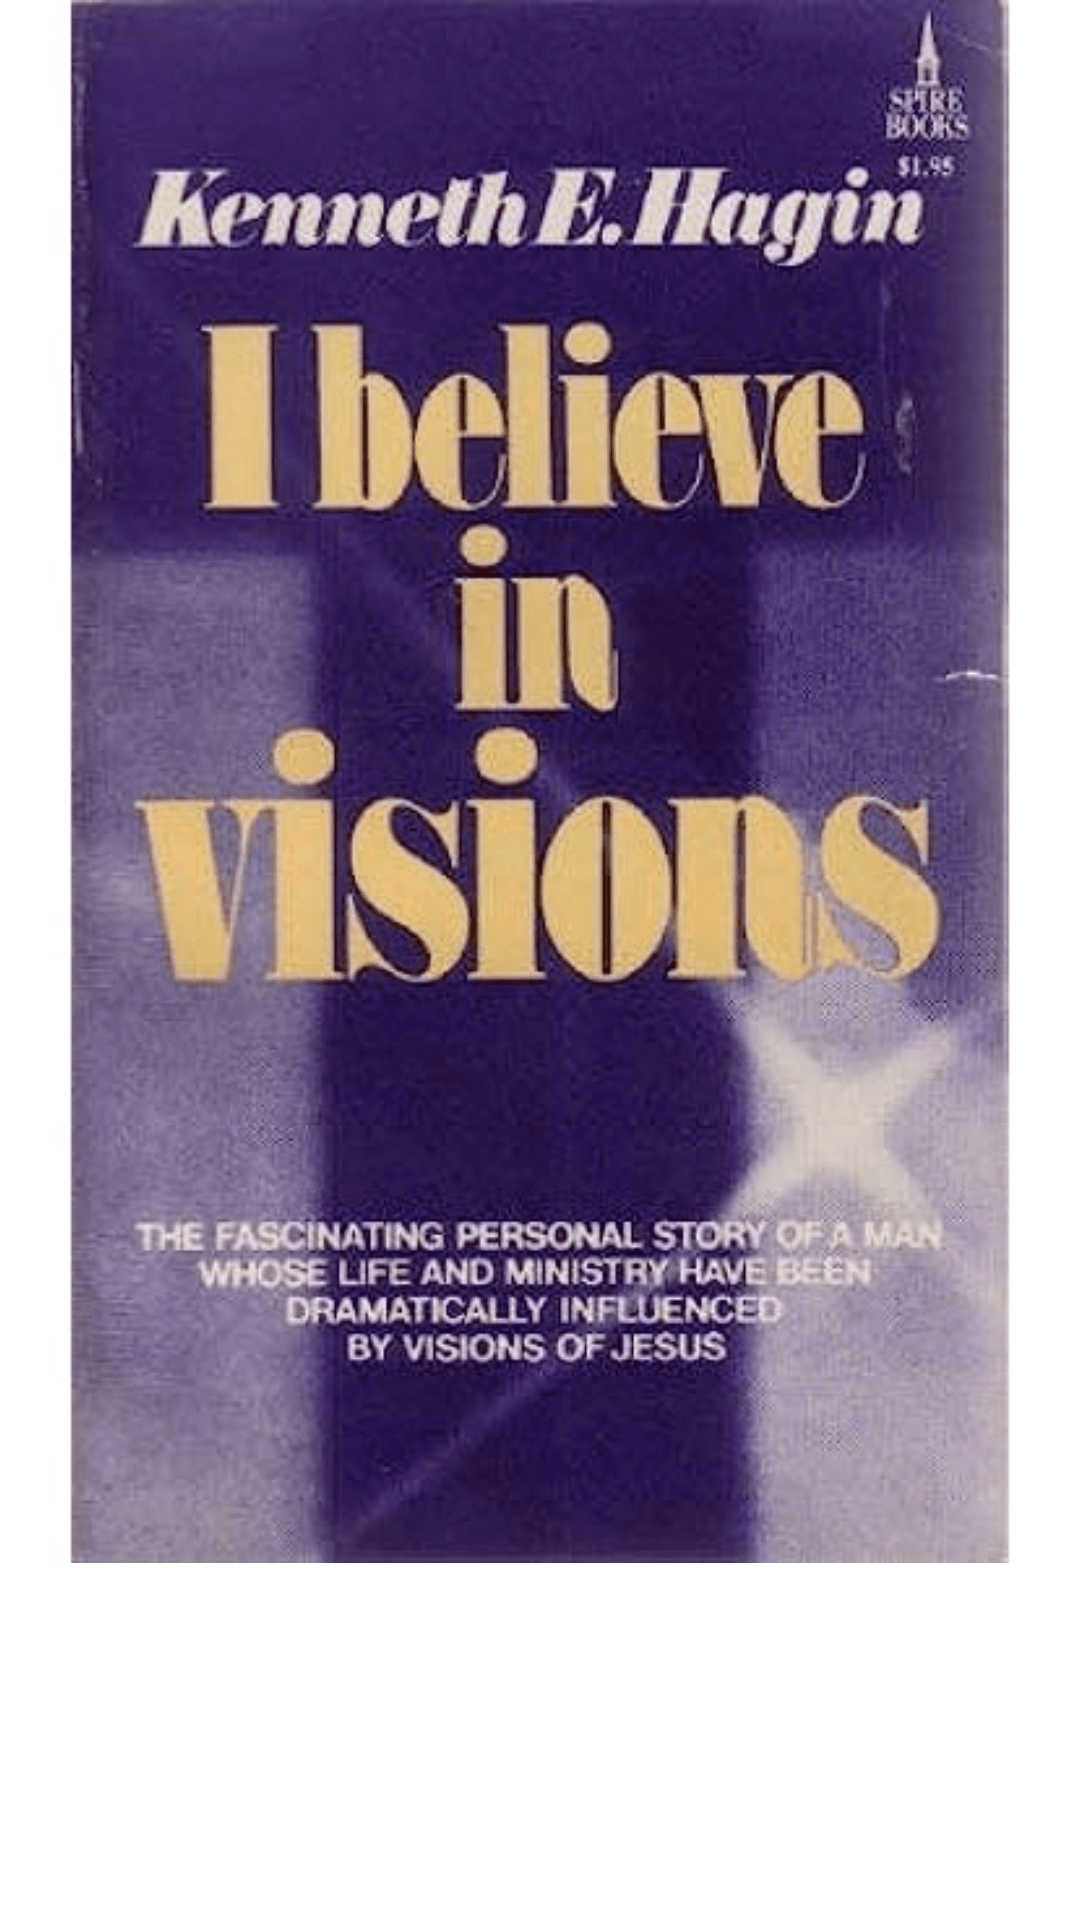 I Believe in Visions by Kenneth E. Hagin